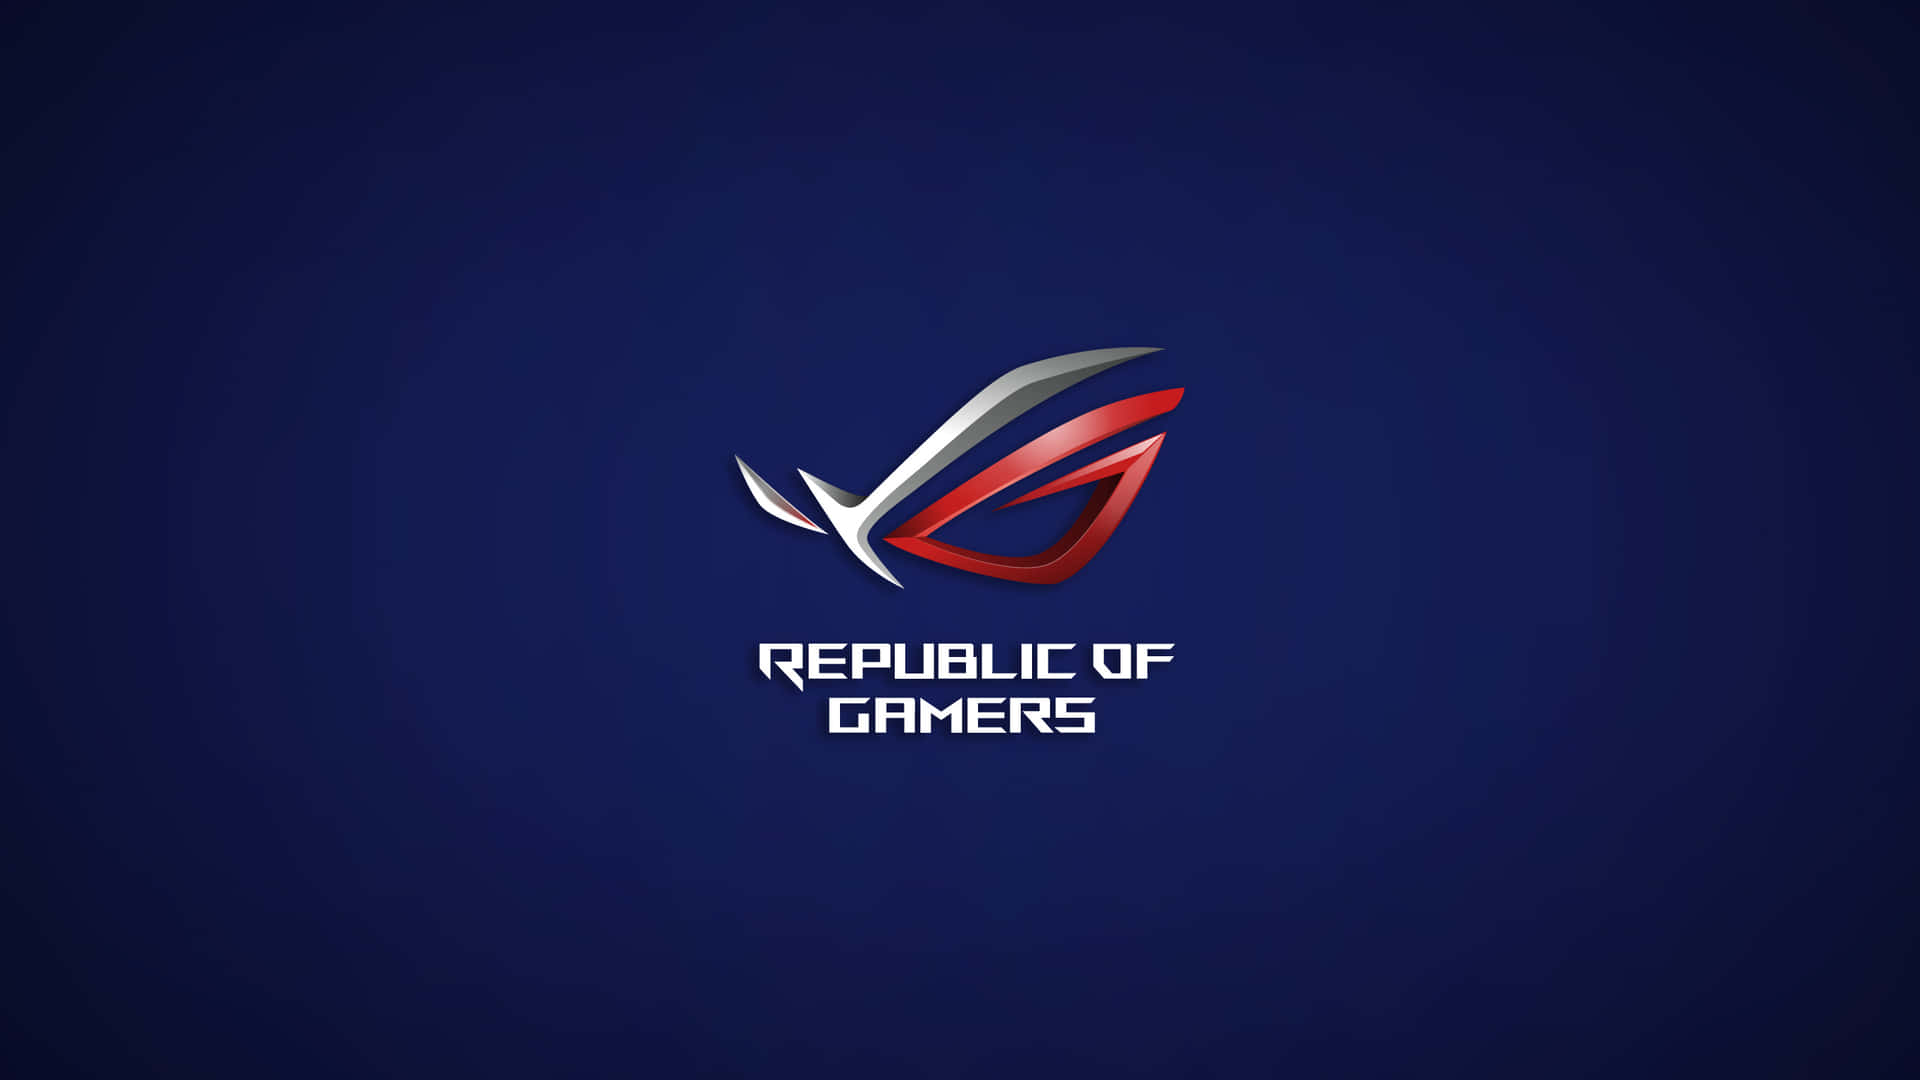 “ROG: Taking PC Gaming to the Next Level”